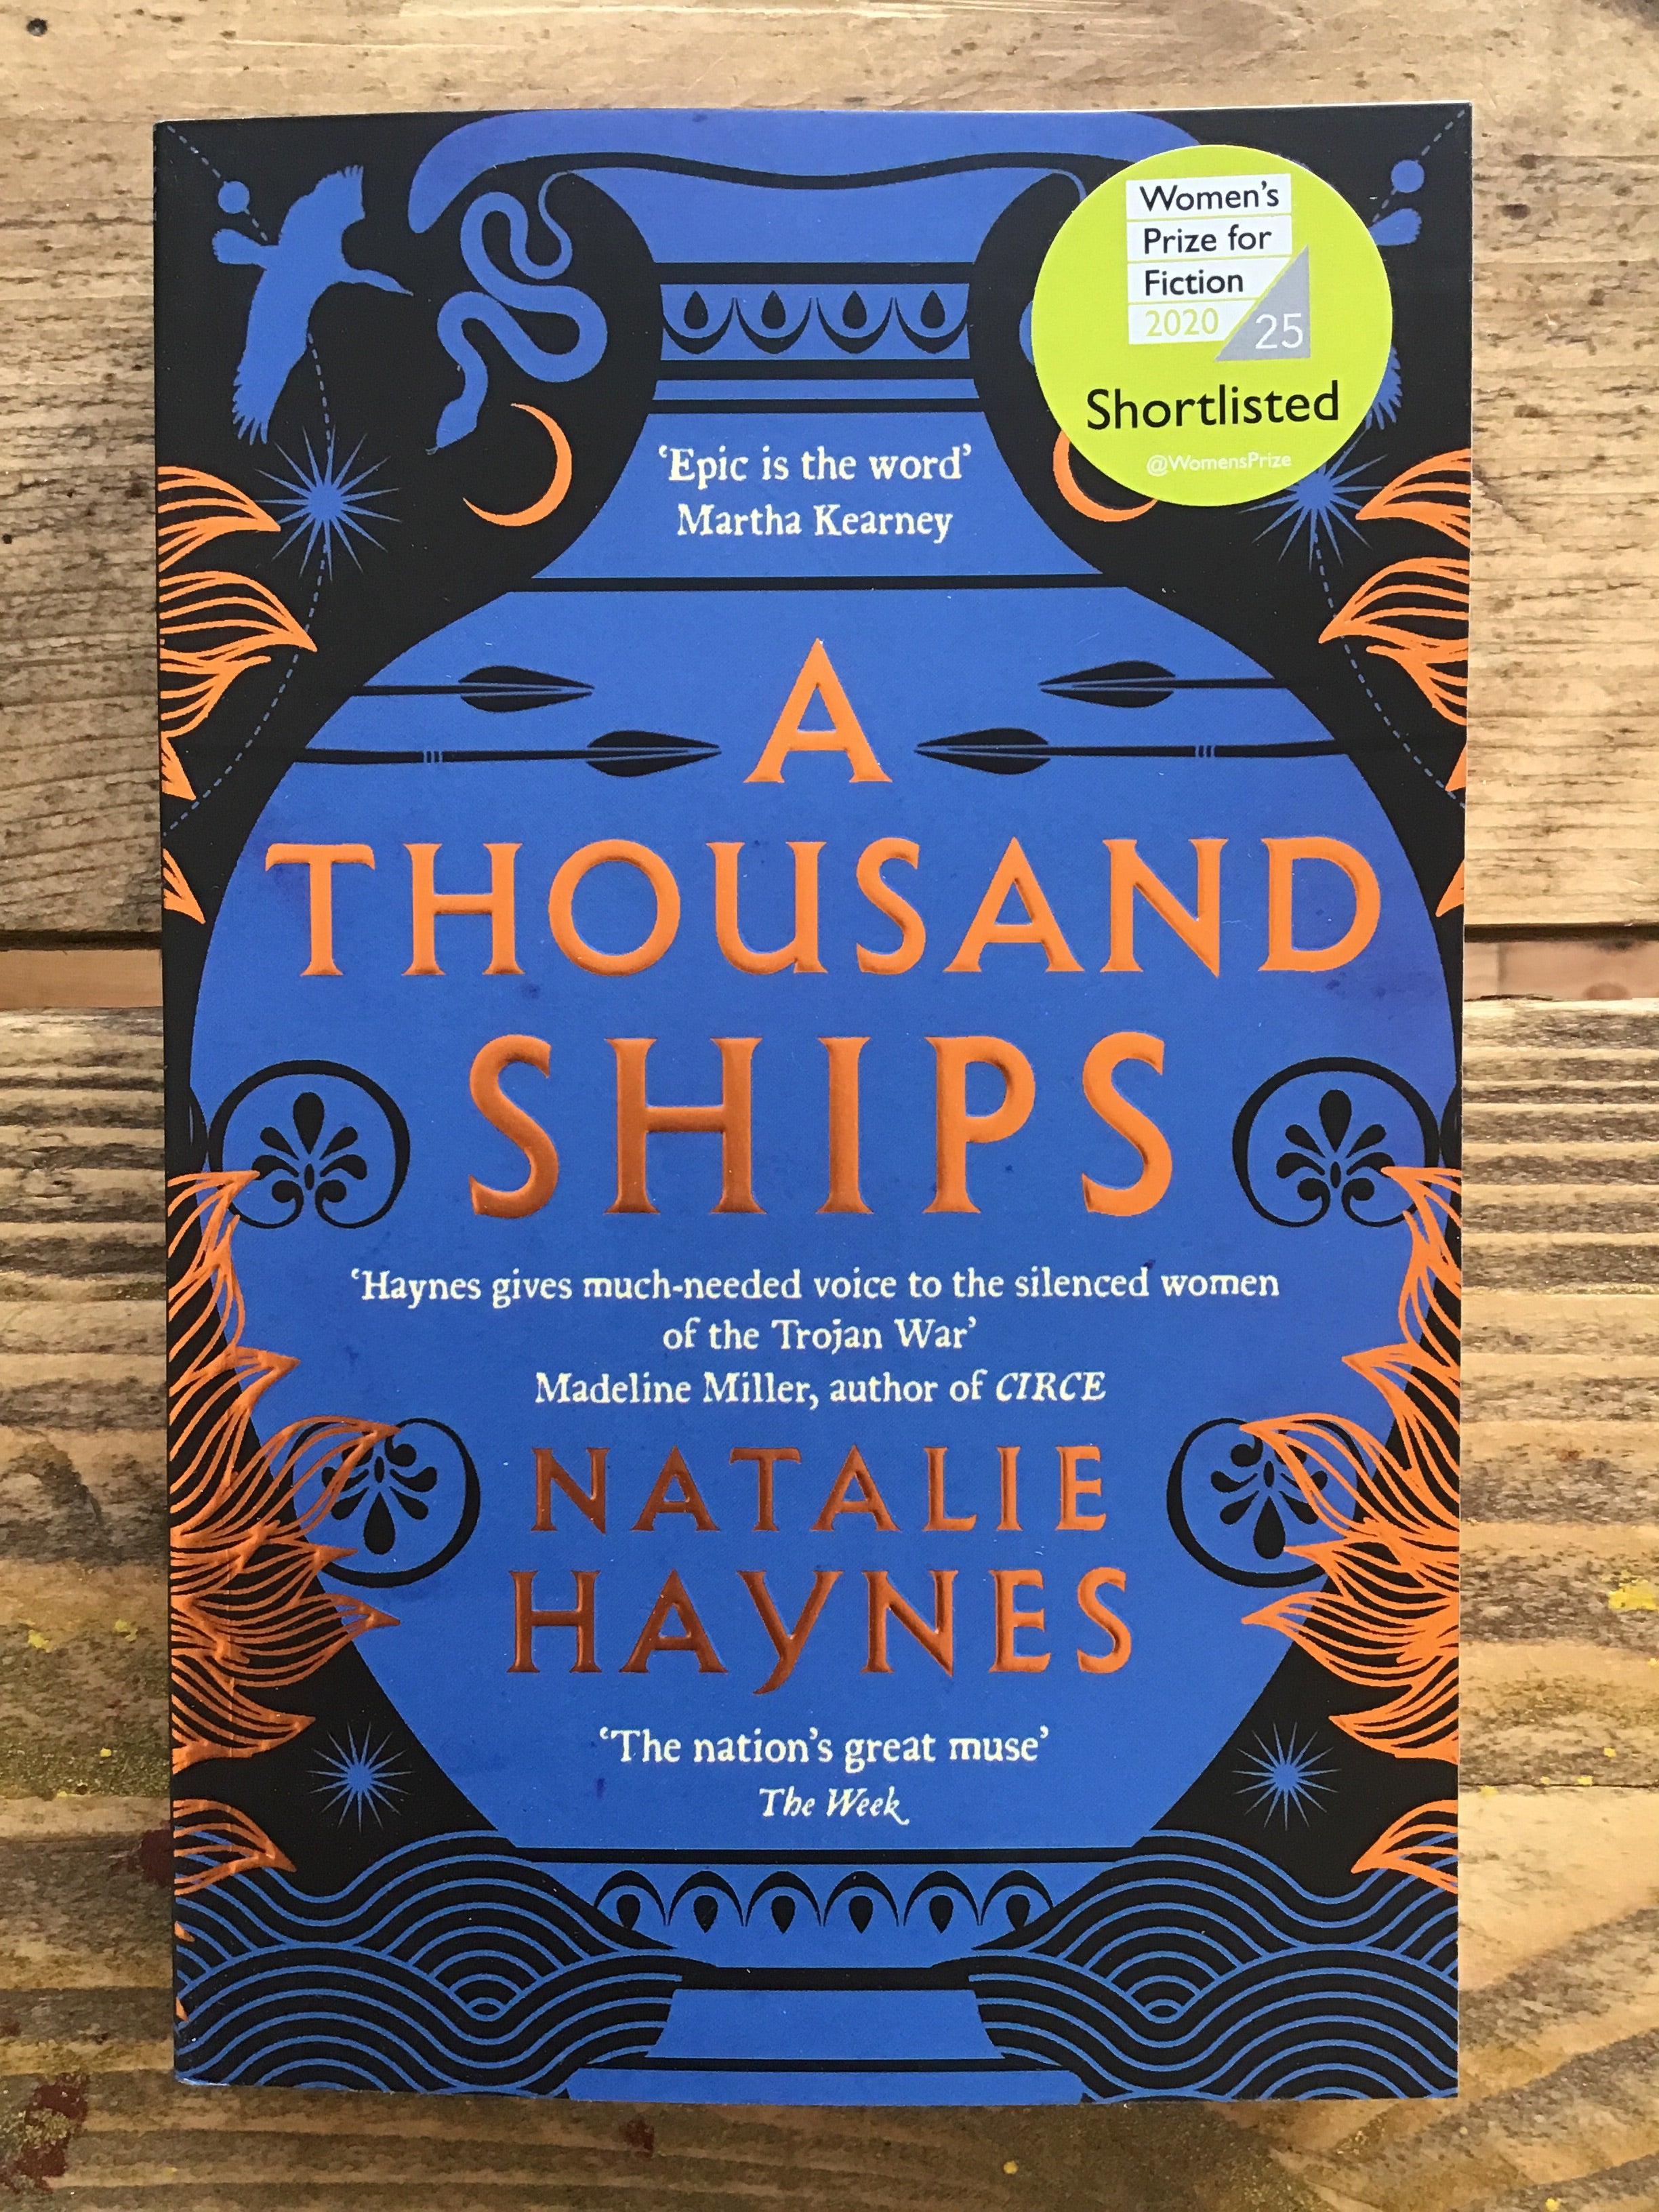 A Thousand Ships by Natalie Haynes